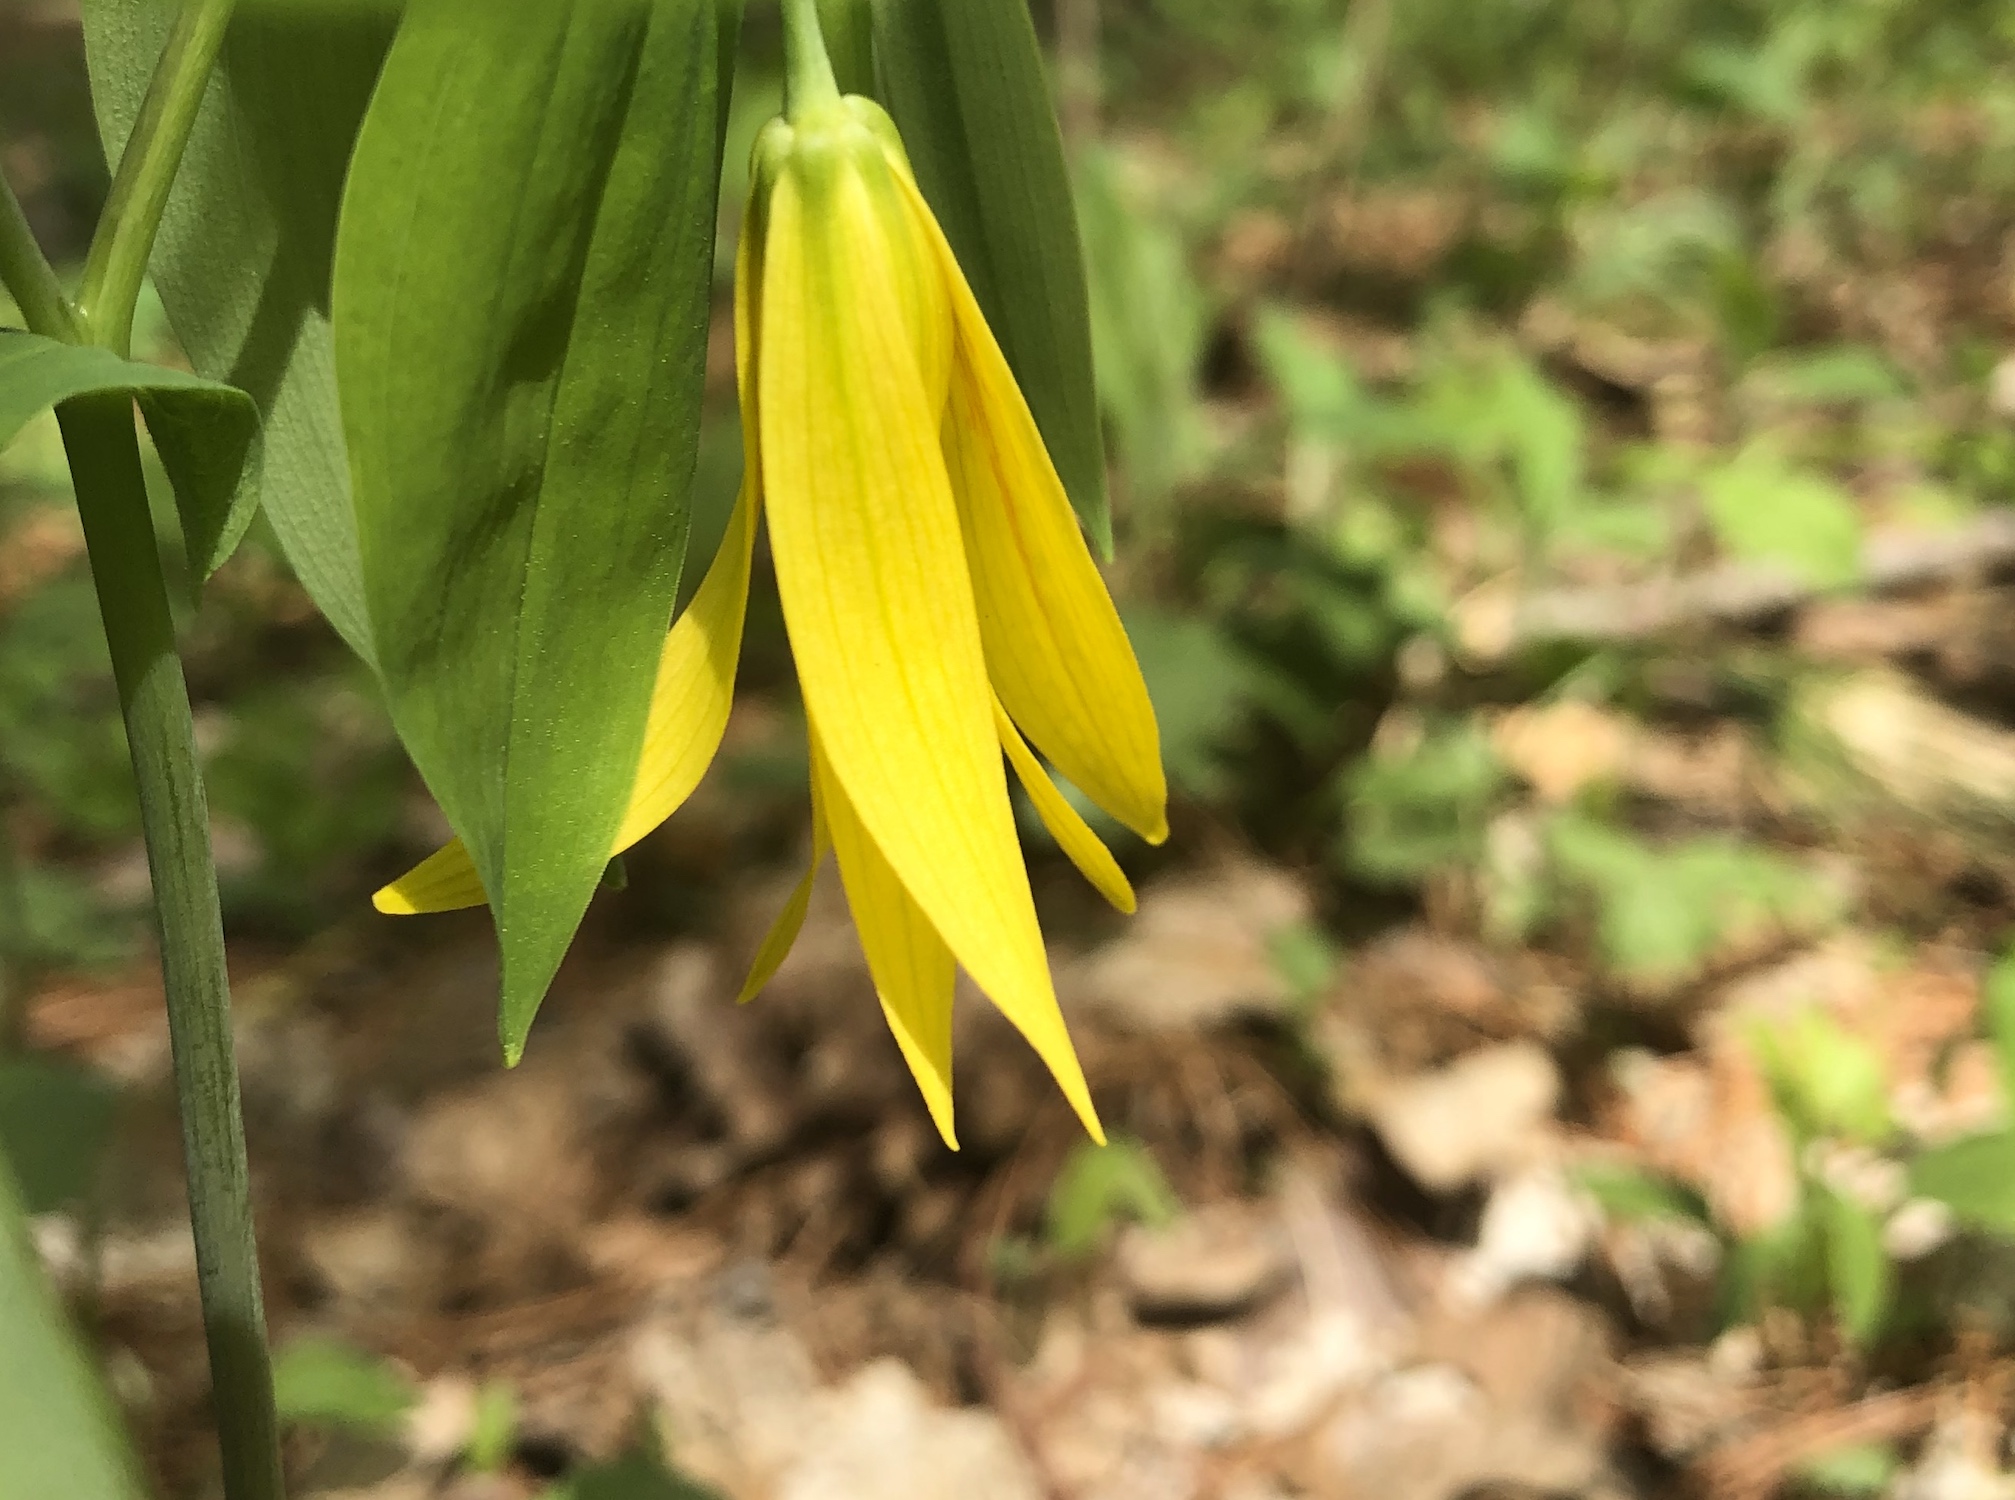 Bellwort in the Maple-Basswood Forest of the University of Wisconsin Arboretum in Madison, Wisconsin on May 5, 2020.